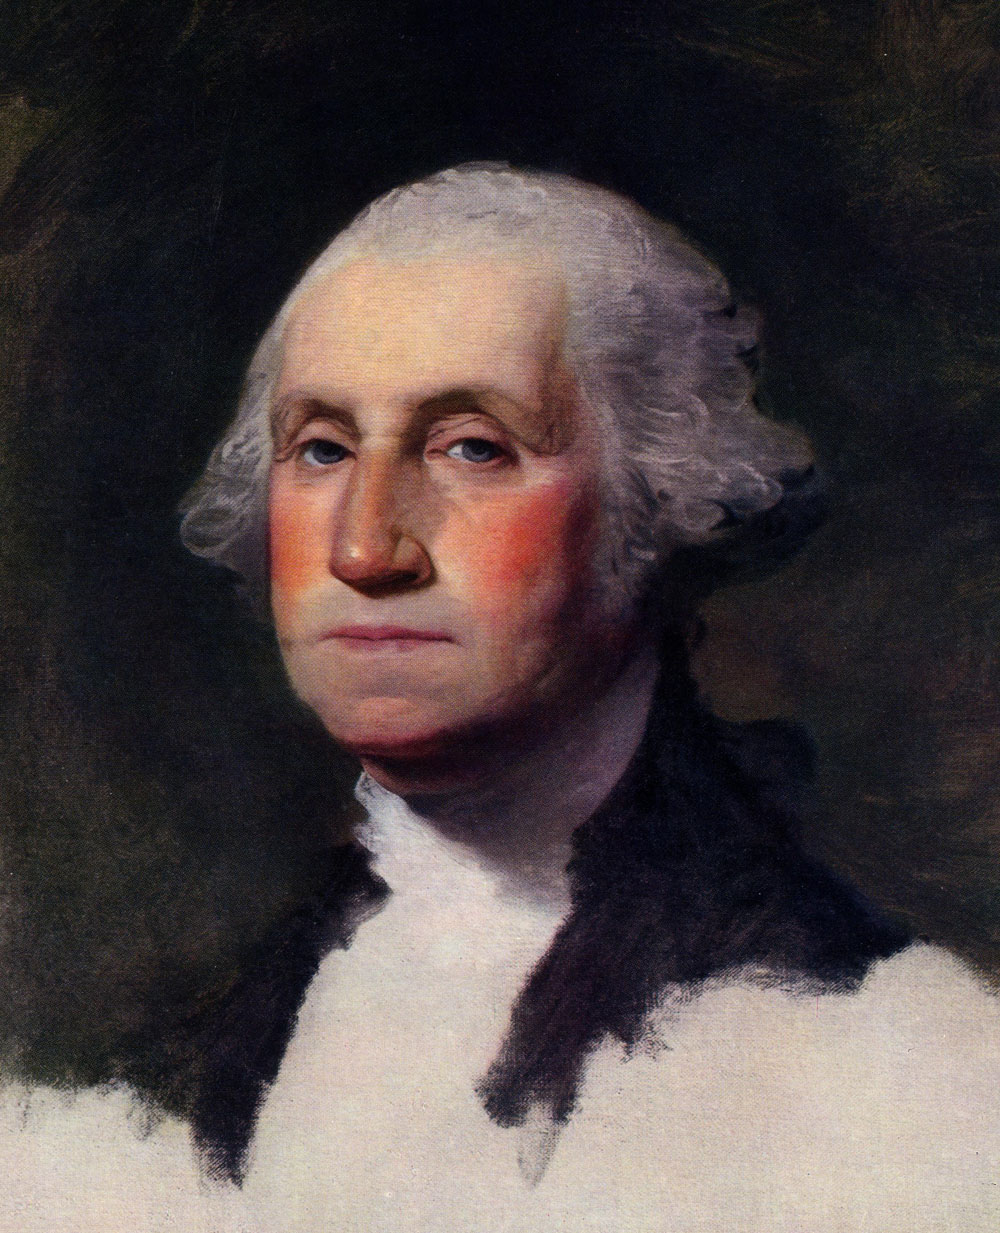 George Washington would sometimes wear lipstick, a powdered wig, and makeup.